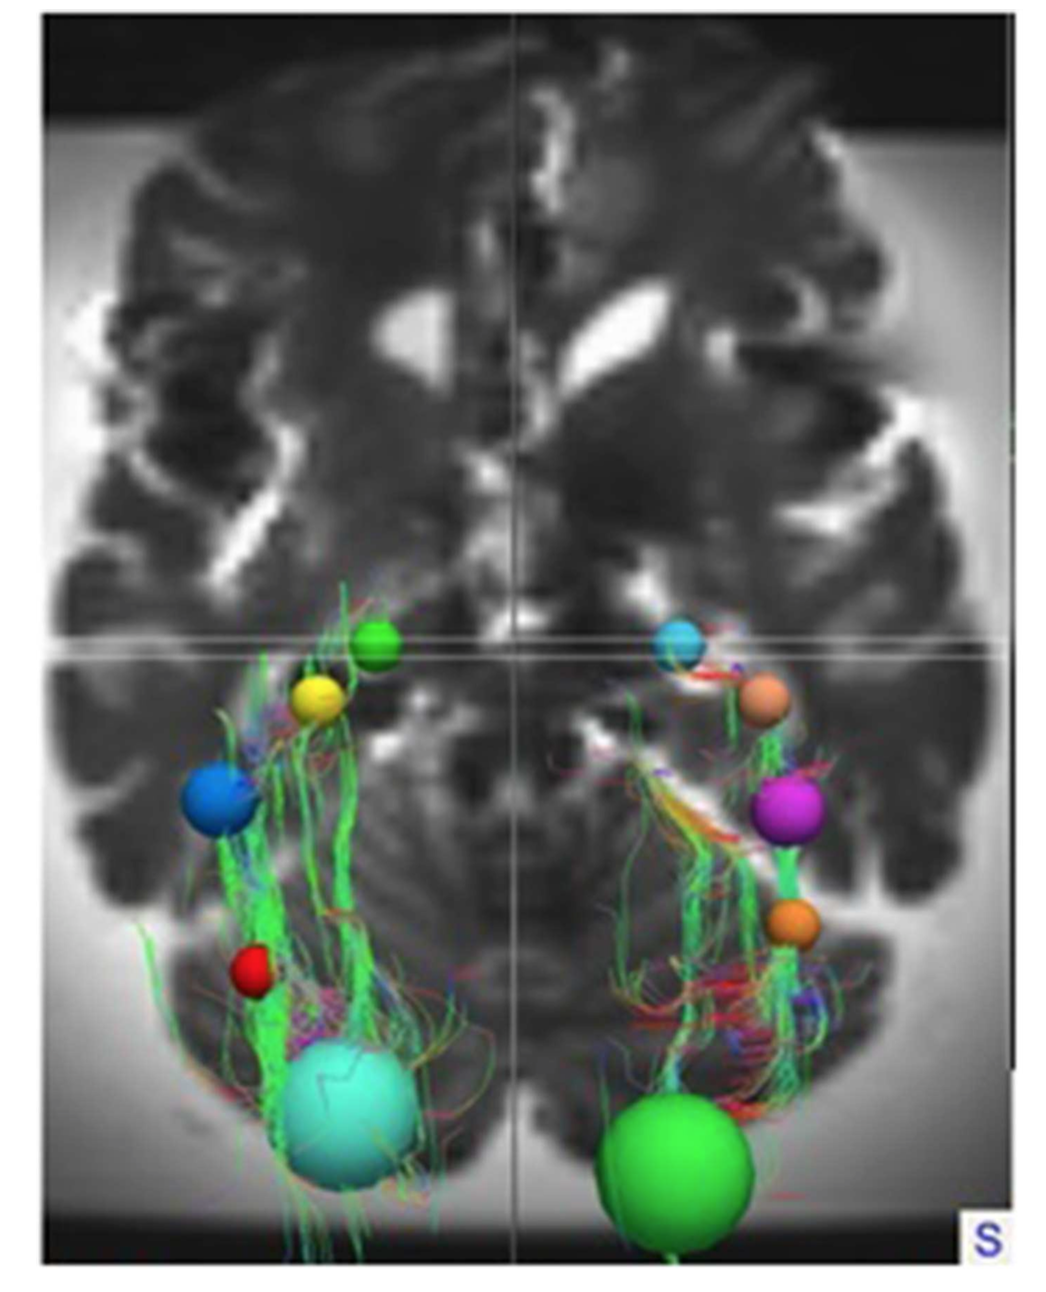 Preservation of the optic radiations based on comparative analysis of diffusion tensor imaging tractography and anatomical dissection